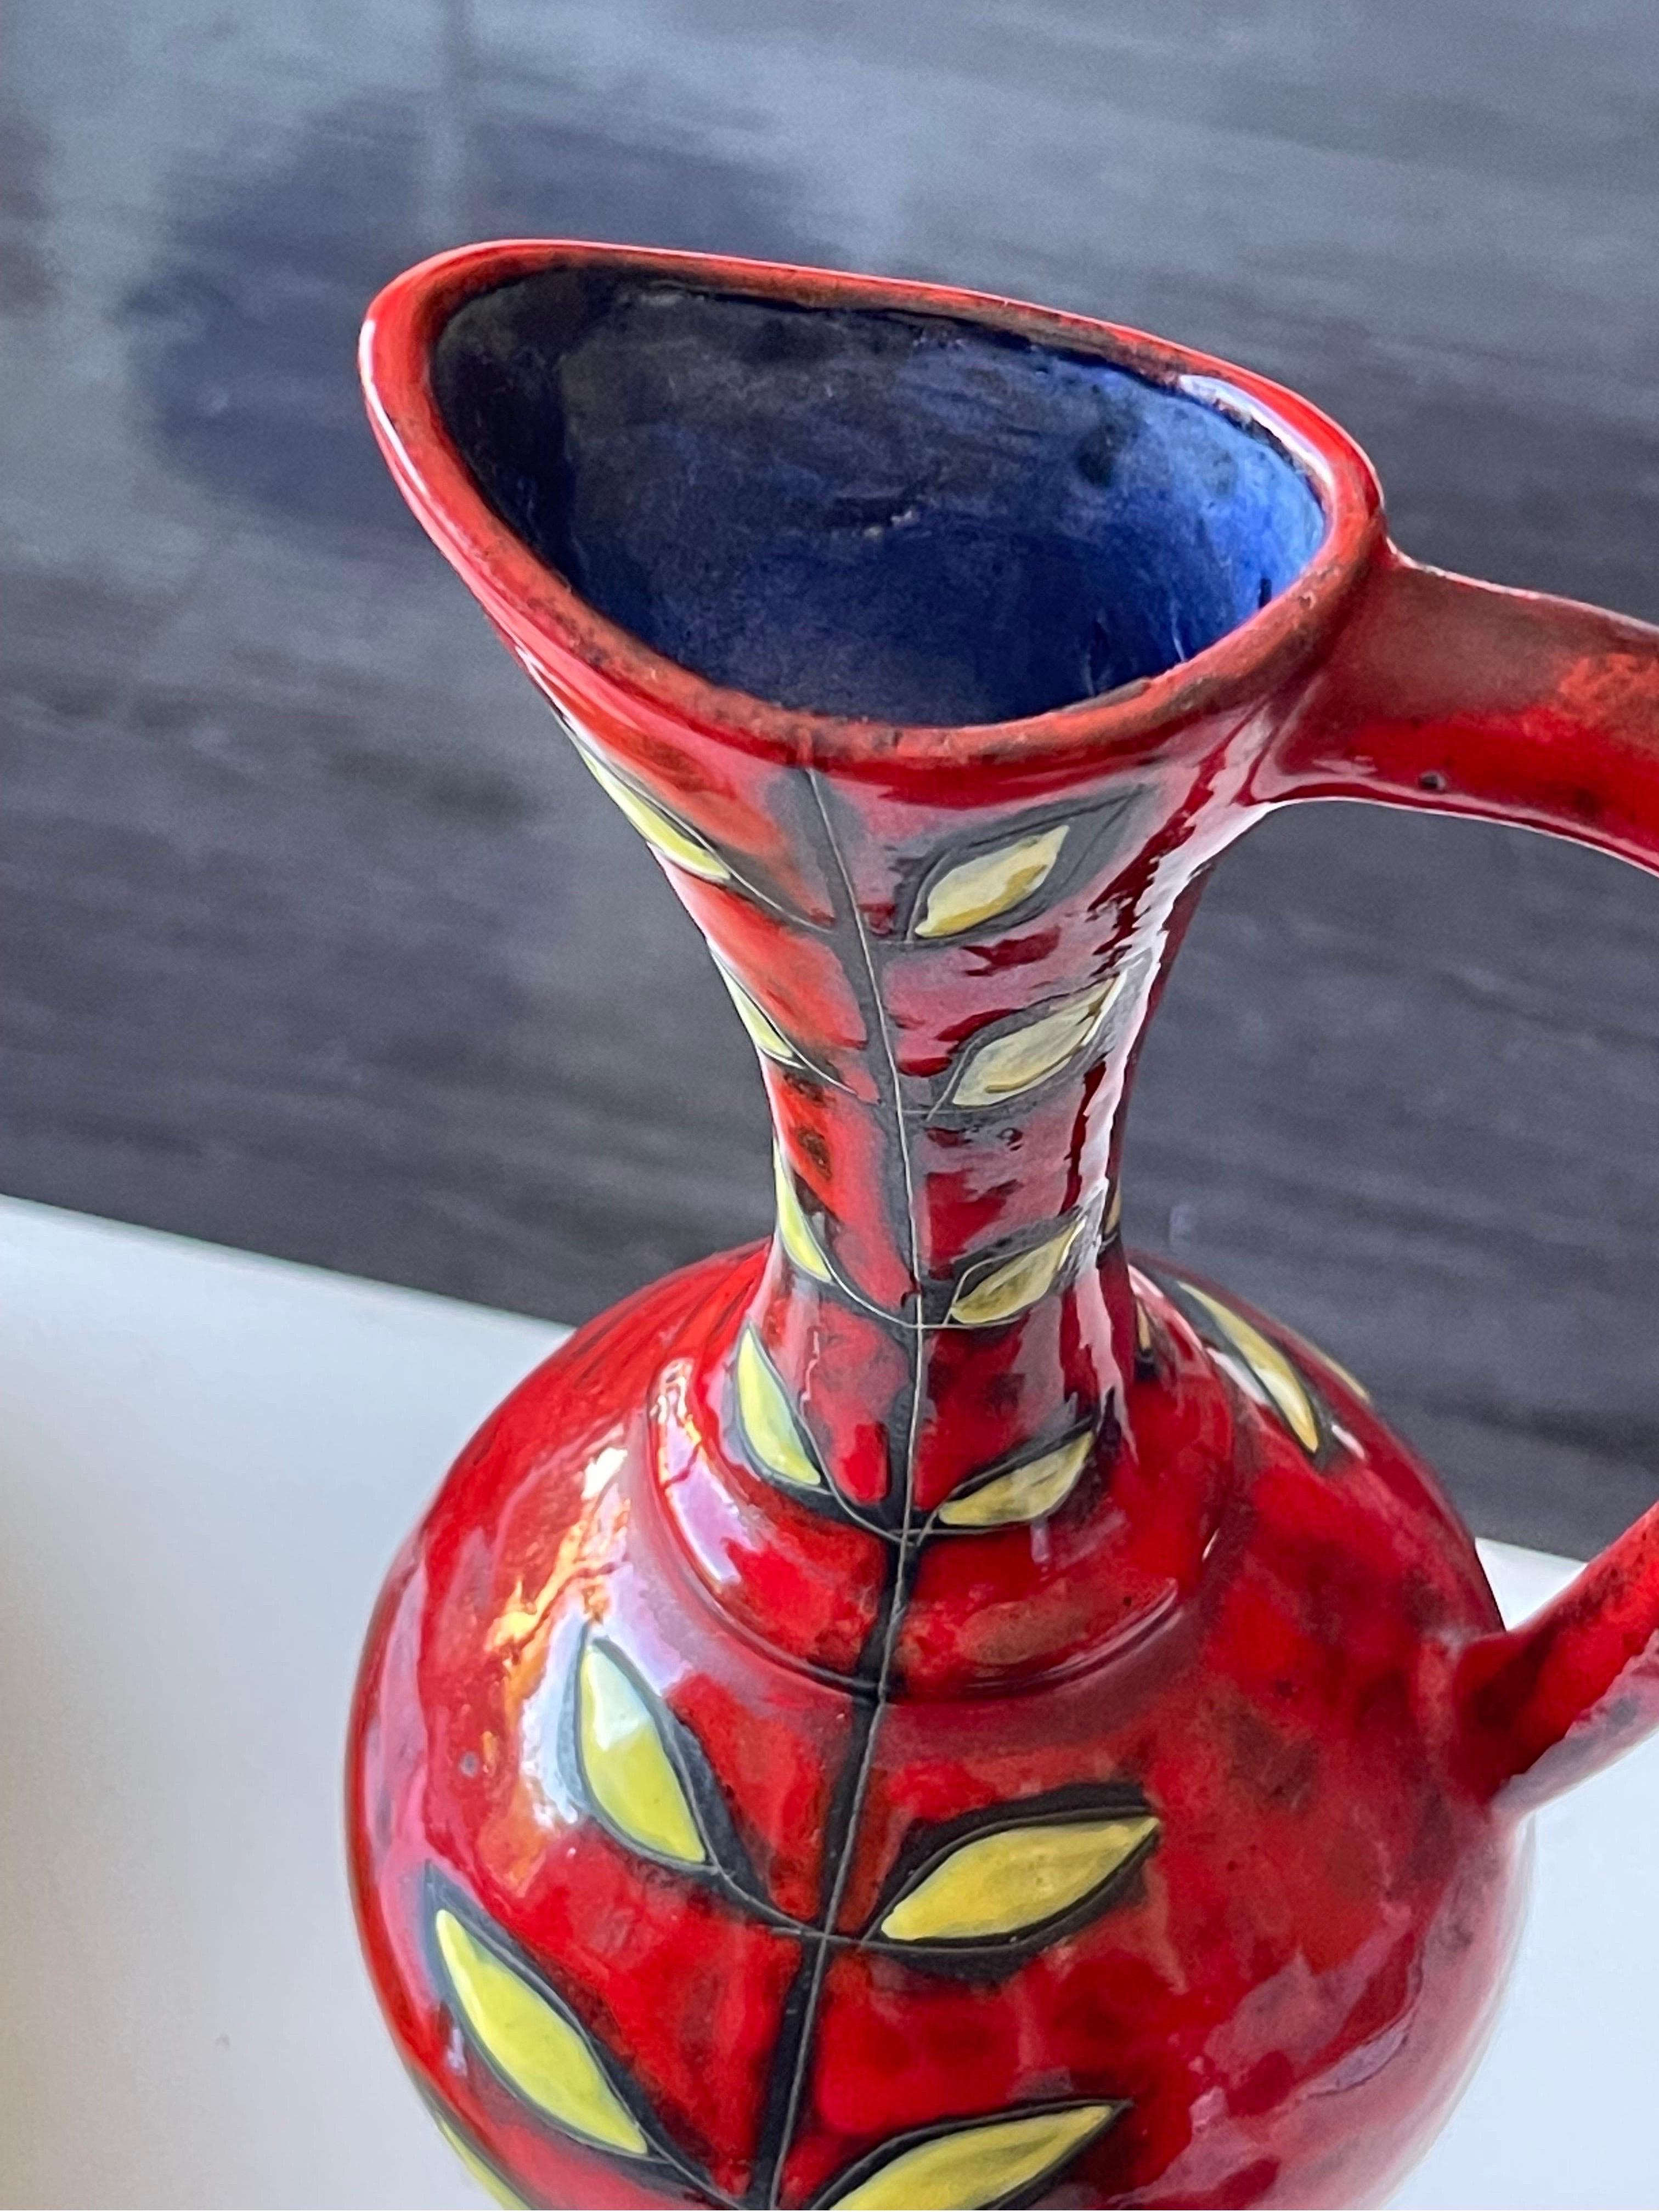 Exquisite Italian Ceramic Vase or Pitcher by Fantoni for Raymor In Good Condition For Sale In Framingham, MA